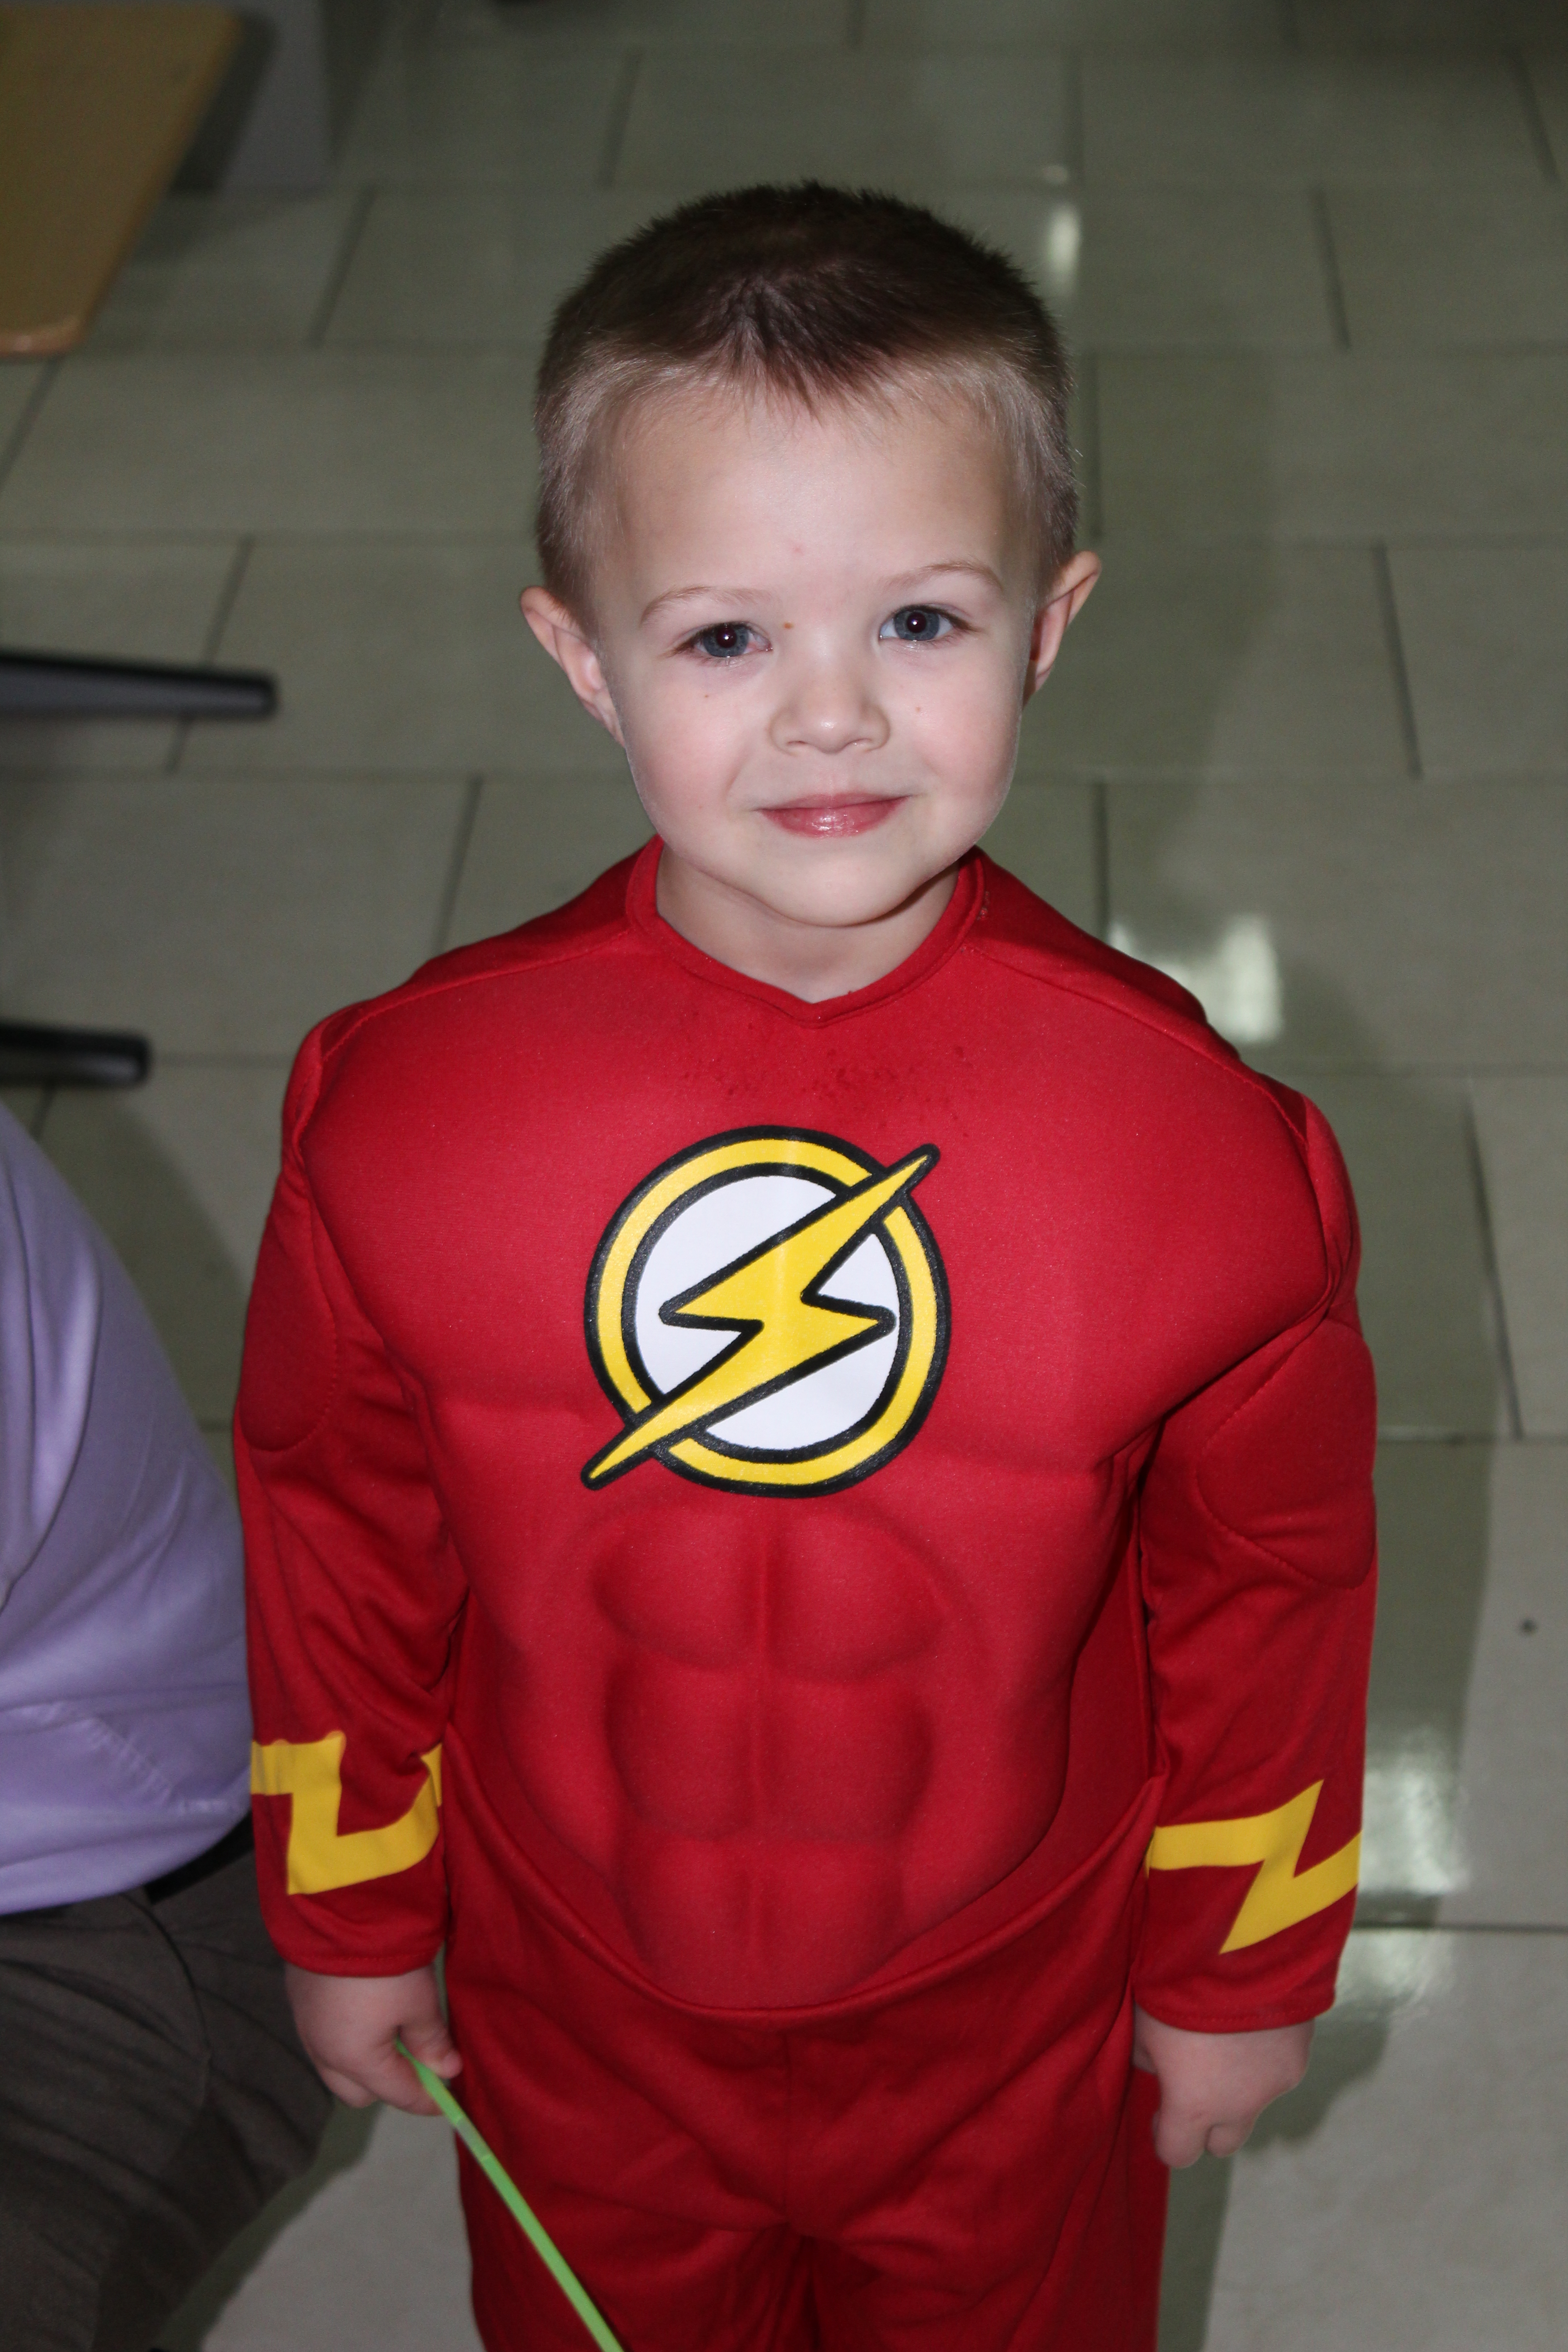 Student dressed as the Flash for Fictional Character Day